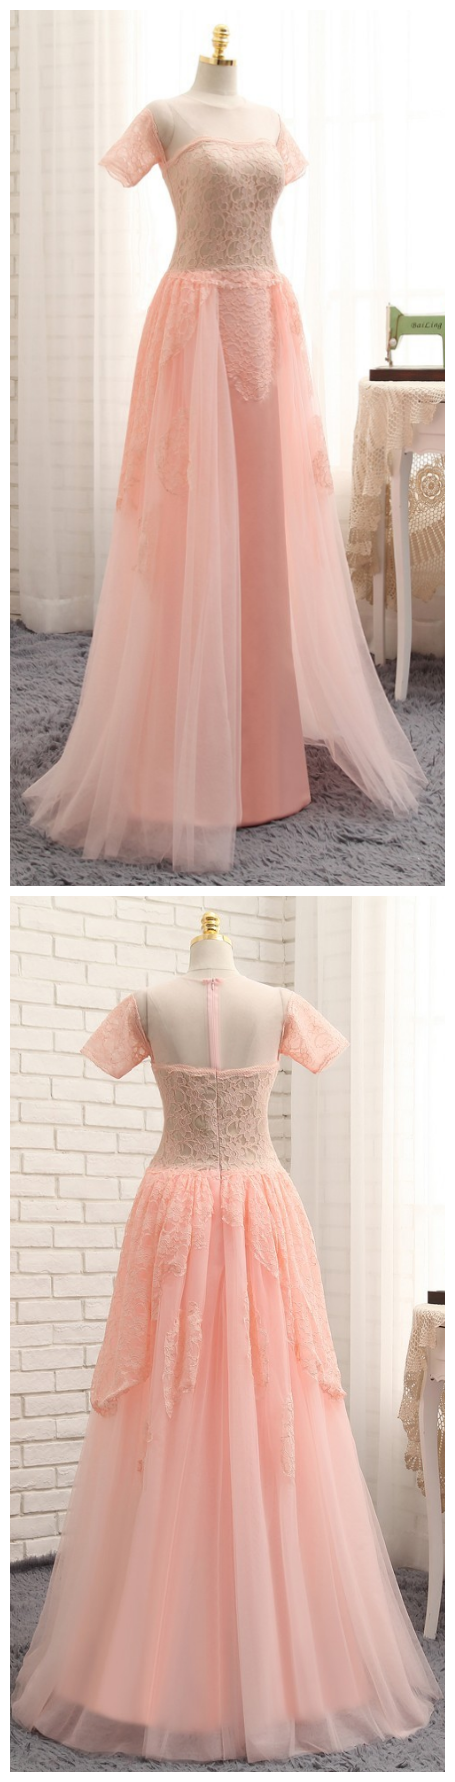 Prom Dresses, A-line Cap Sleeves Chiffon Lace Pink Long Prom Gown, Evening Dresses, Evening Gown